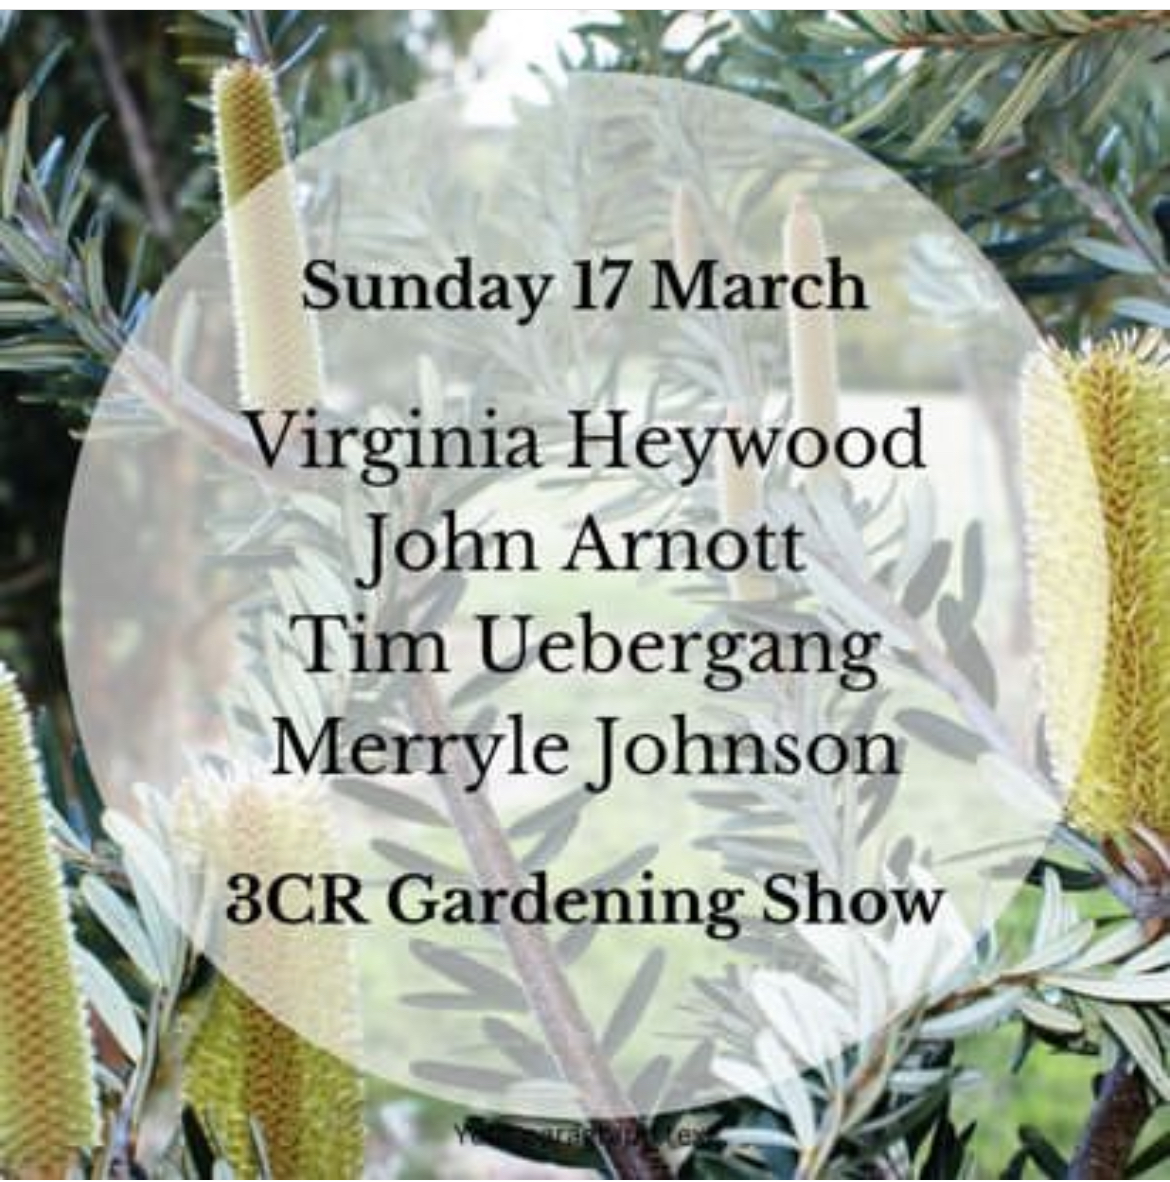 Image is text over an image of flowers that says Sunday 17 March Virginia Heywood John Arnott Tim Uebergang Merryle Johnson 3CR Gardening Show